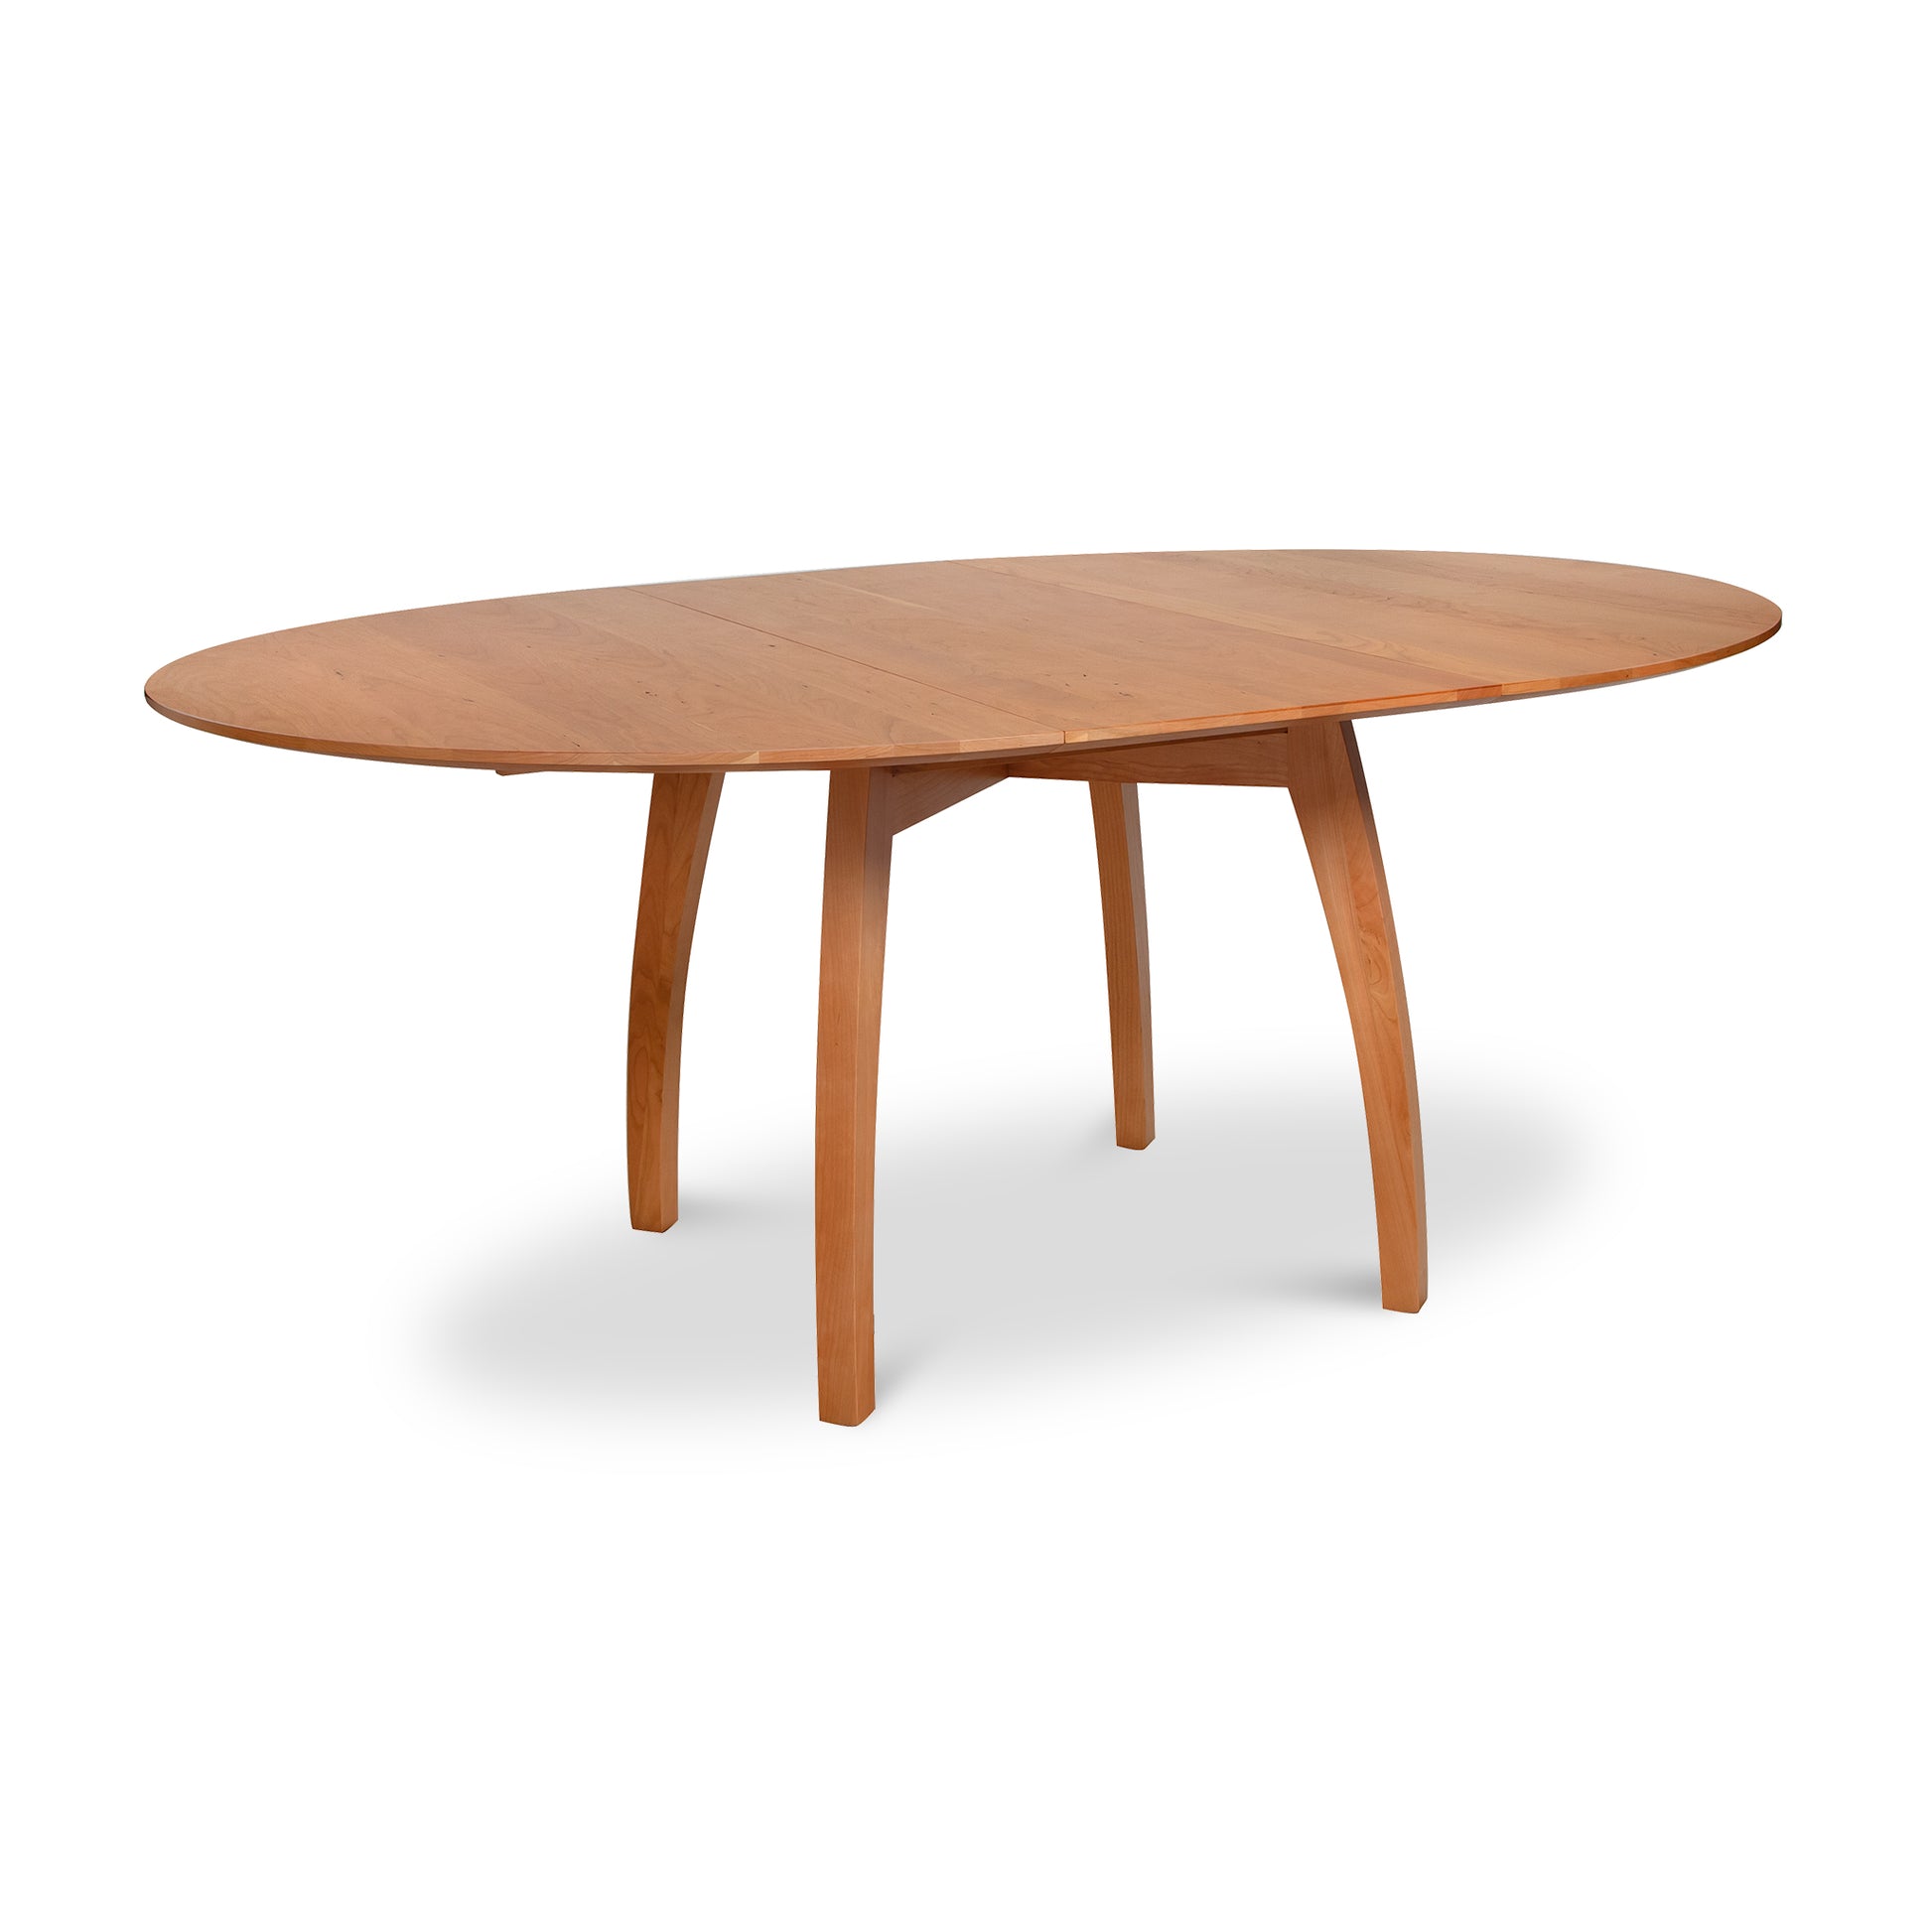 A Lyndon Furniture Vermont Modern Round Pedestal Extension Table, featuring a contemporary design with natural handcrafted solid wood construction and two legs.